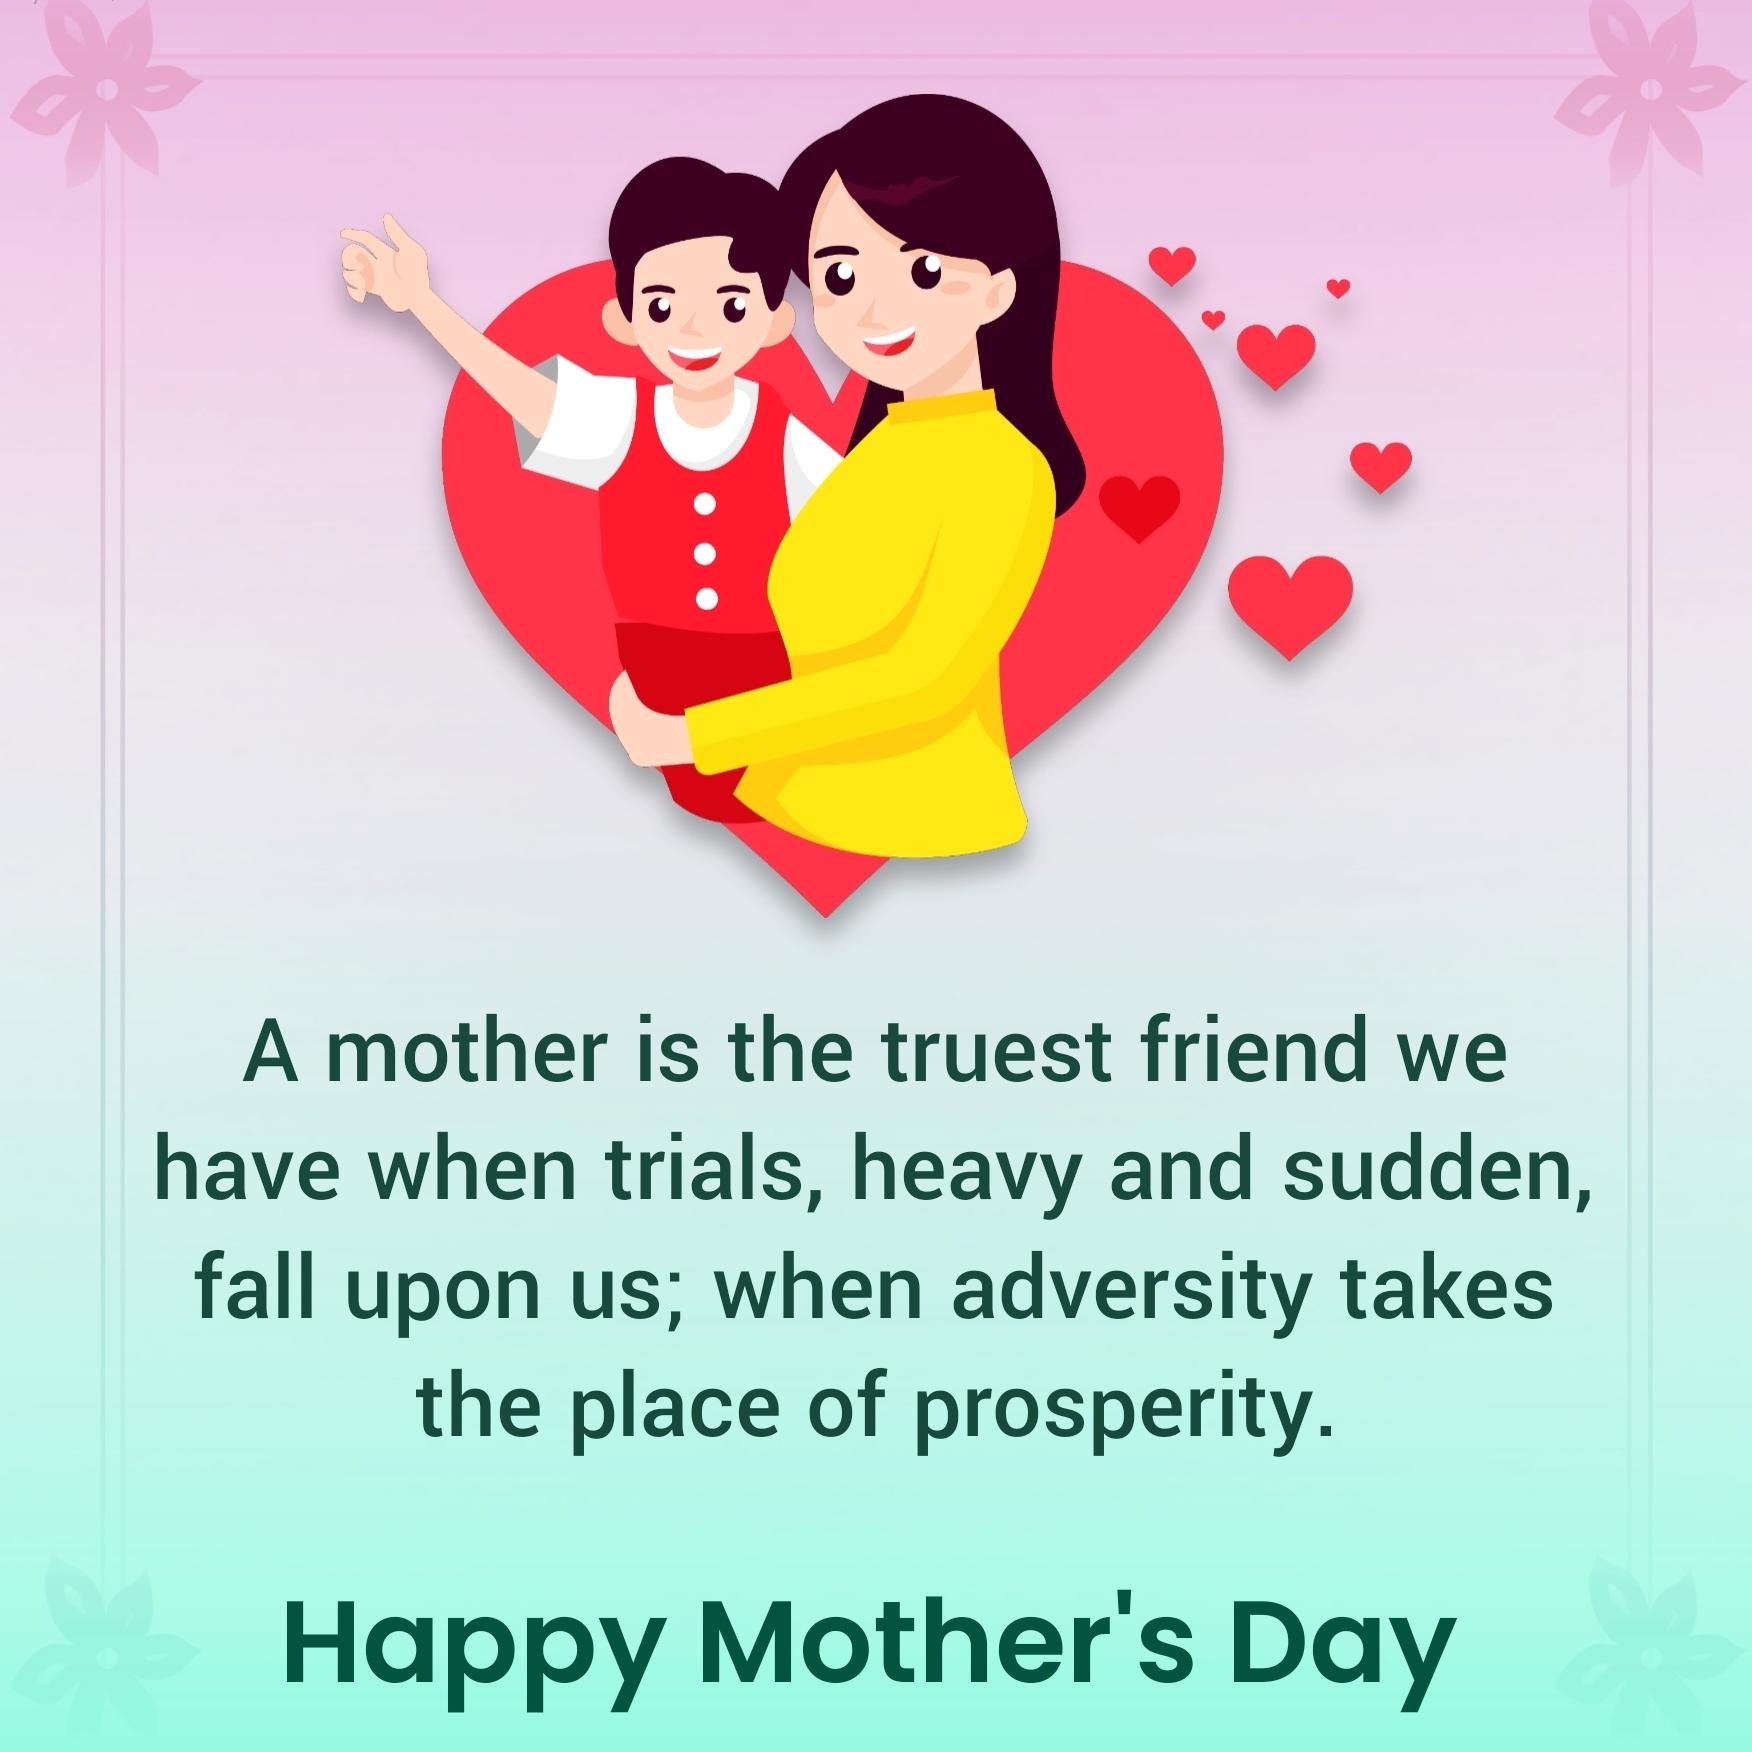 A mother is the truest friend we have when trials